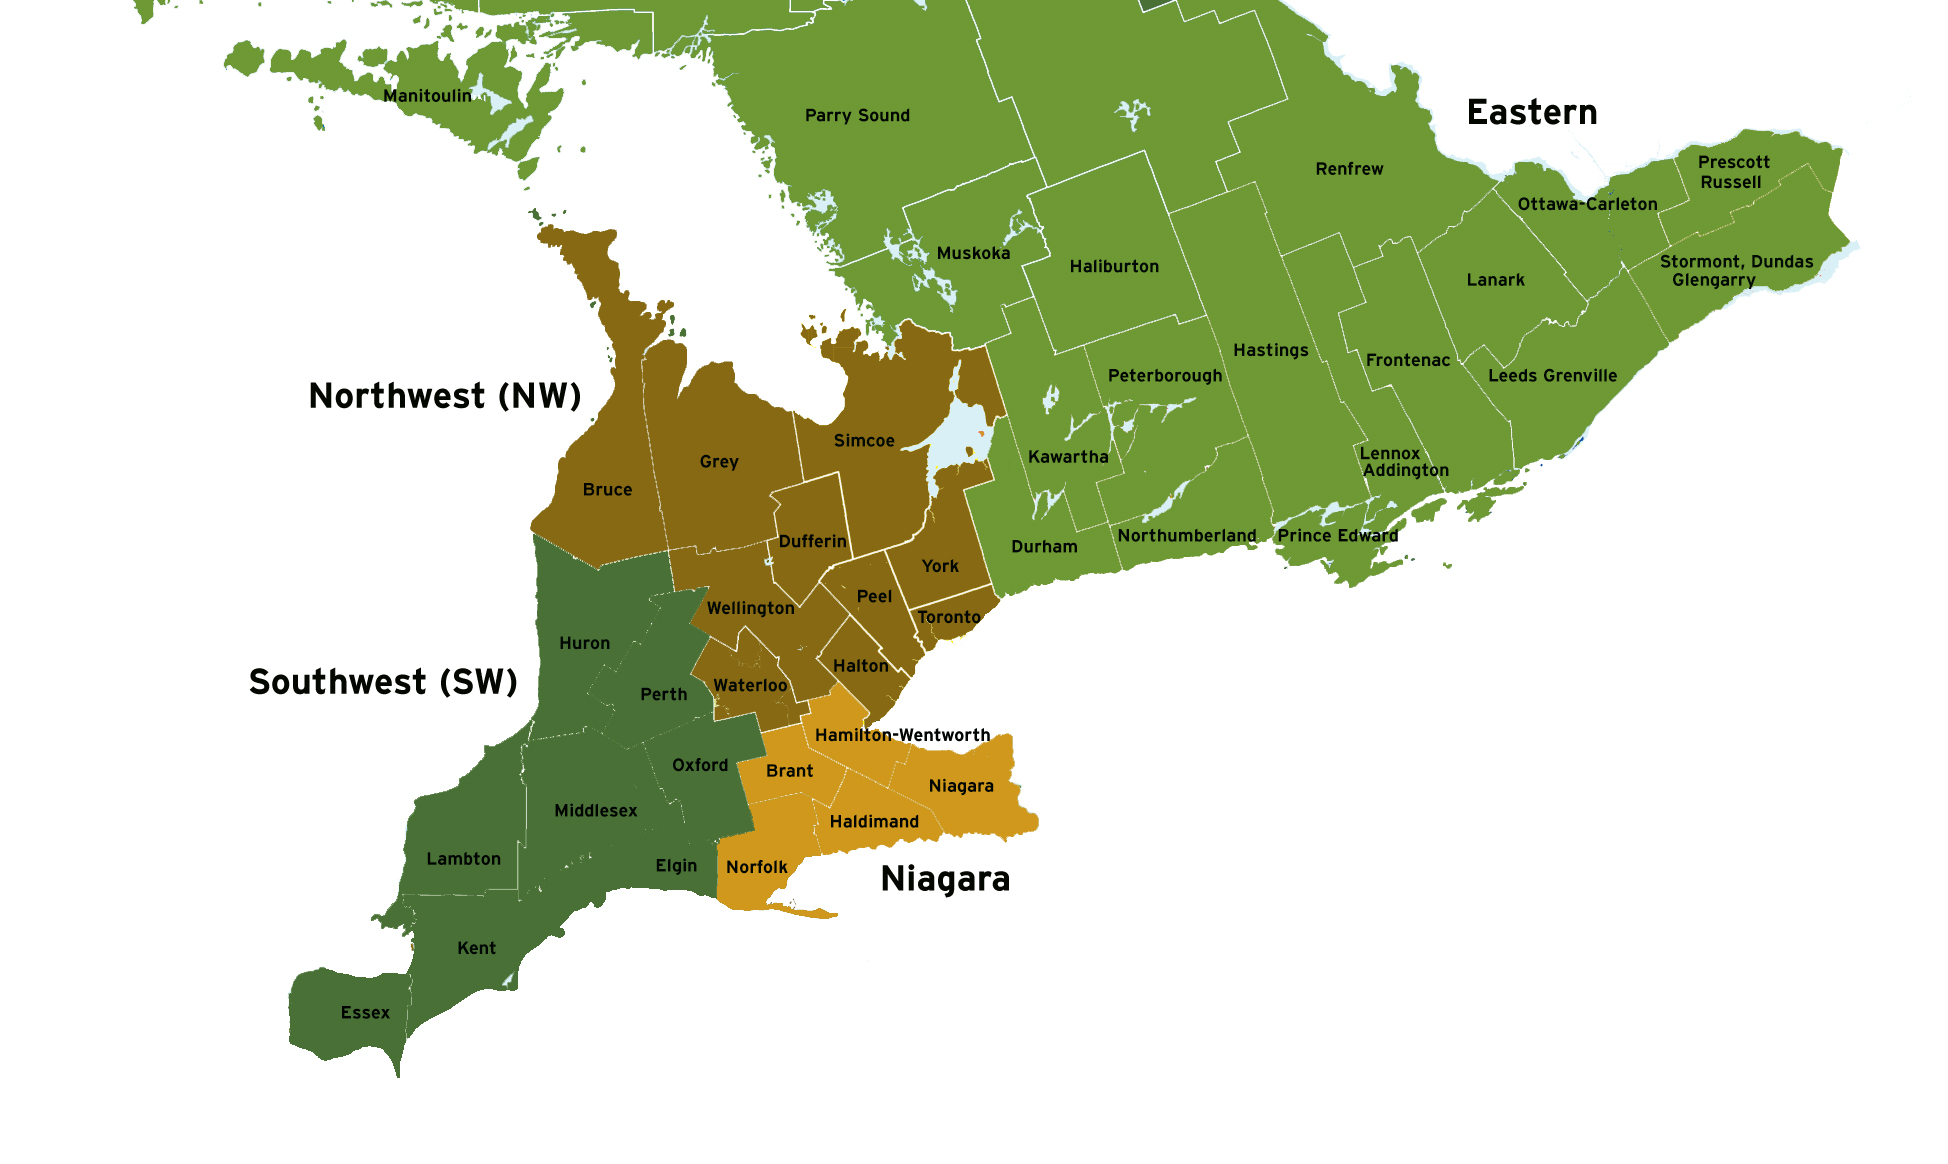 Wheat sampling regions in Ontario with county names